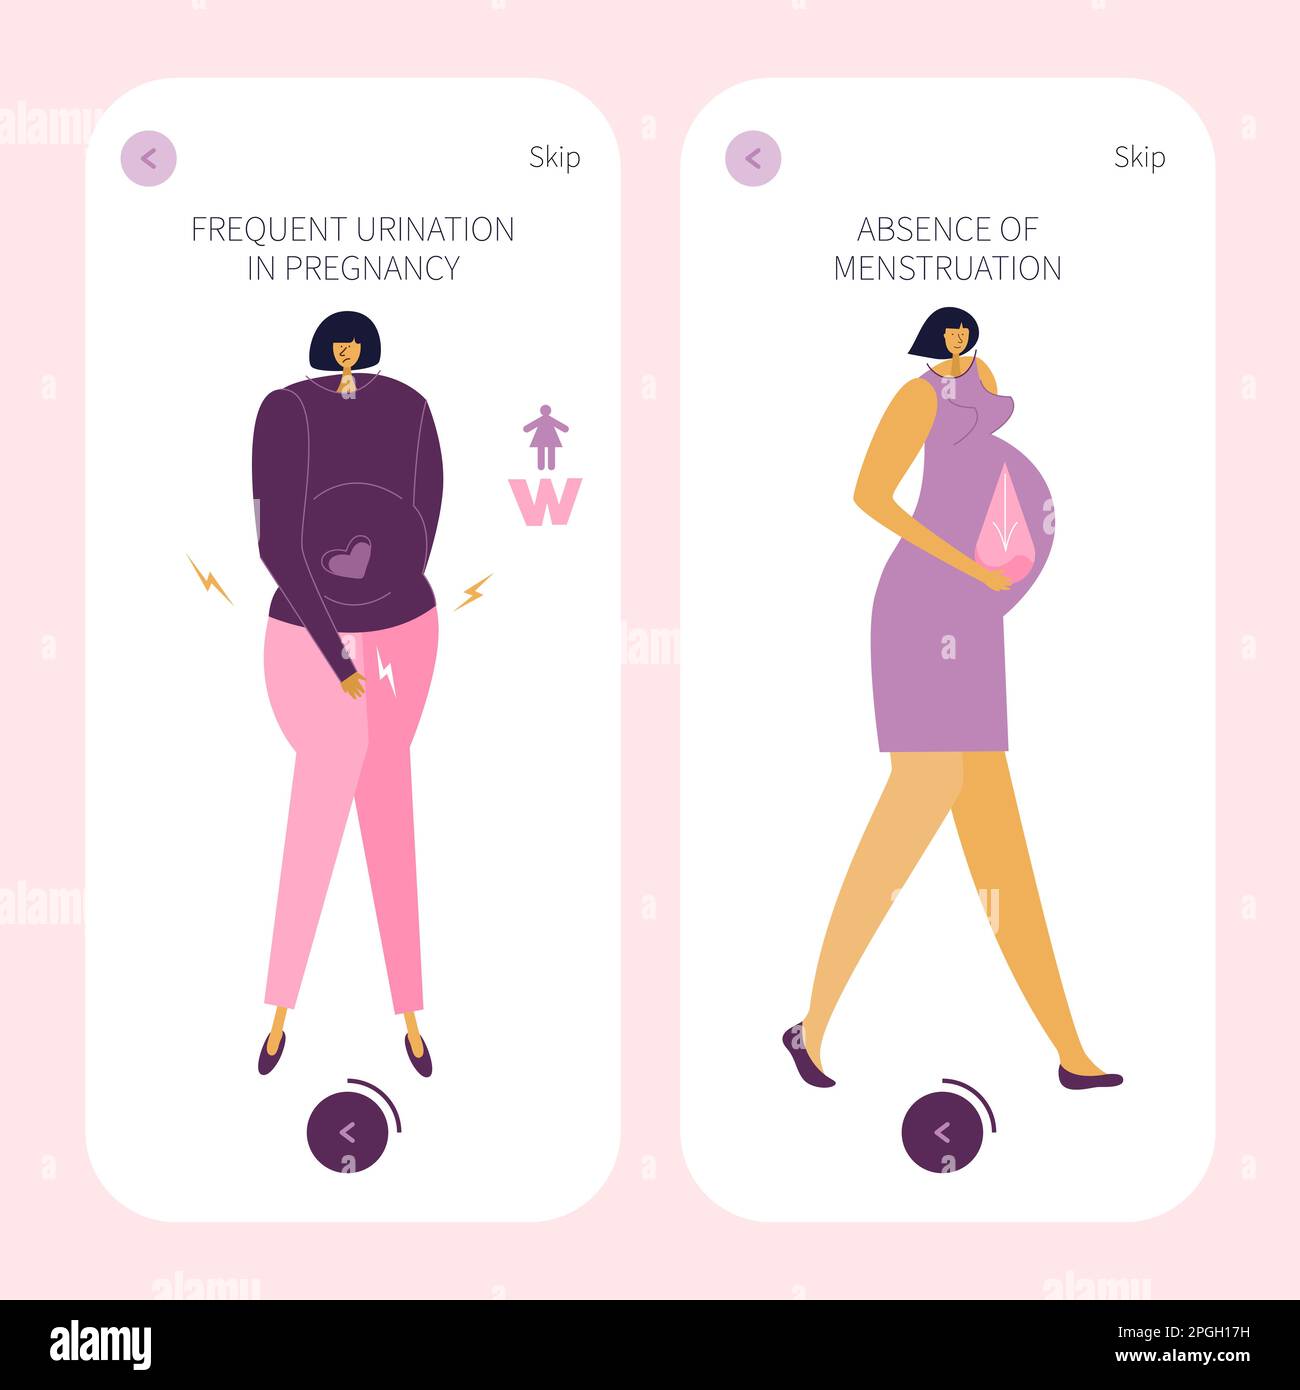 The app design with pregnancy symptoms. New mom absence of